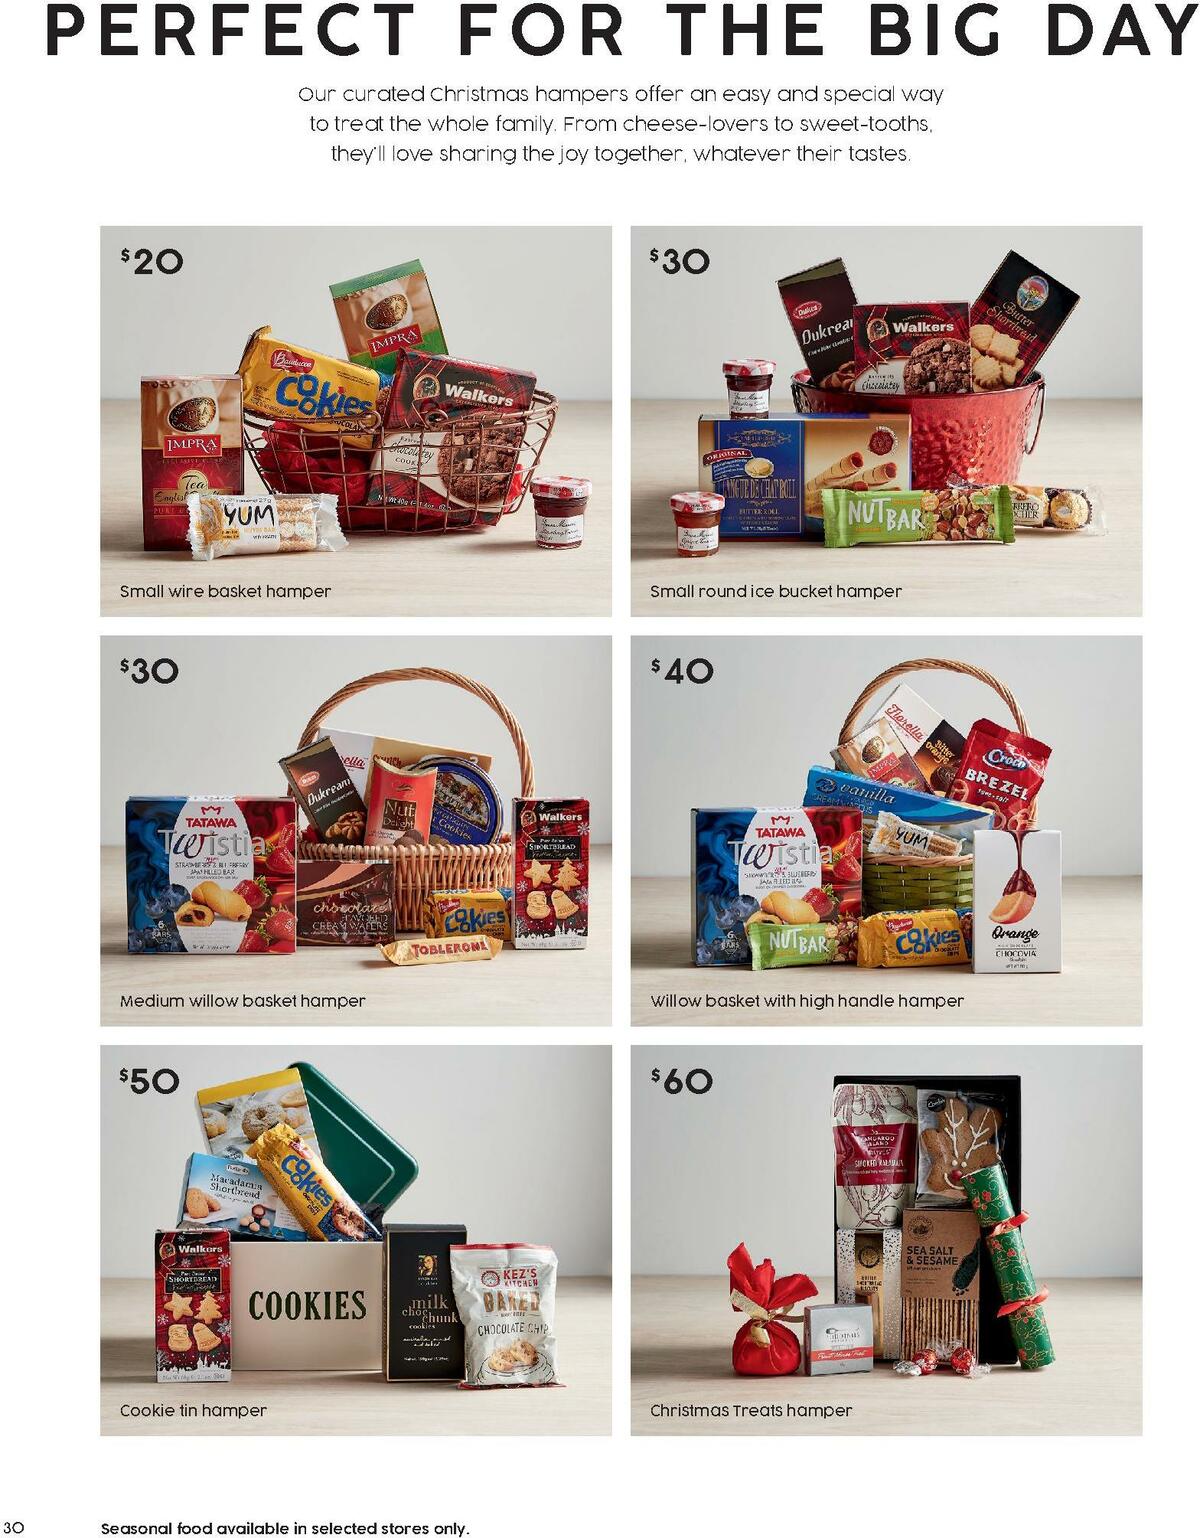 Target Gifting Made Better Catalogues from 4 November